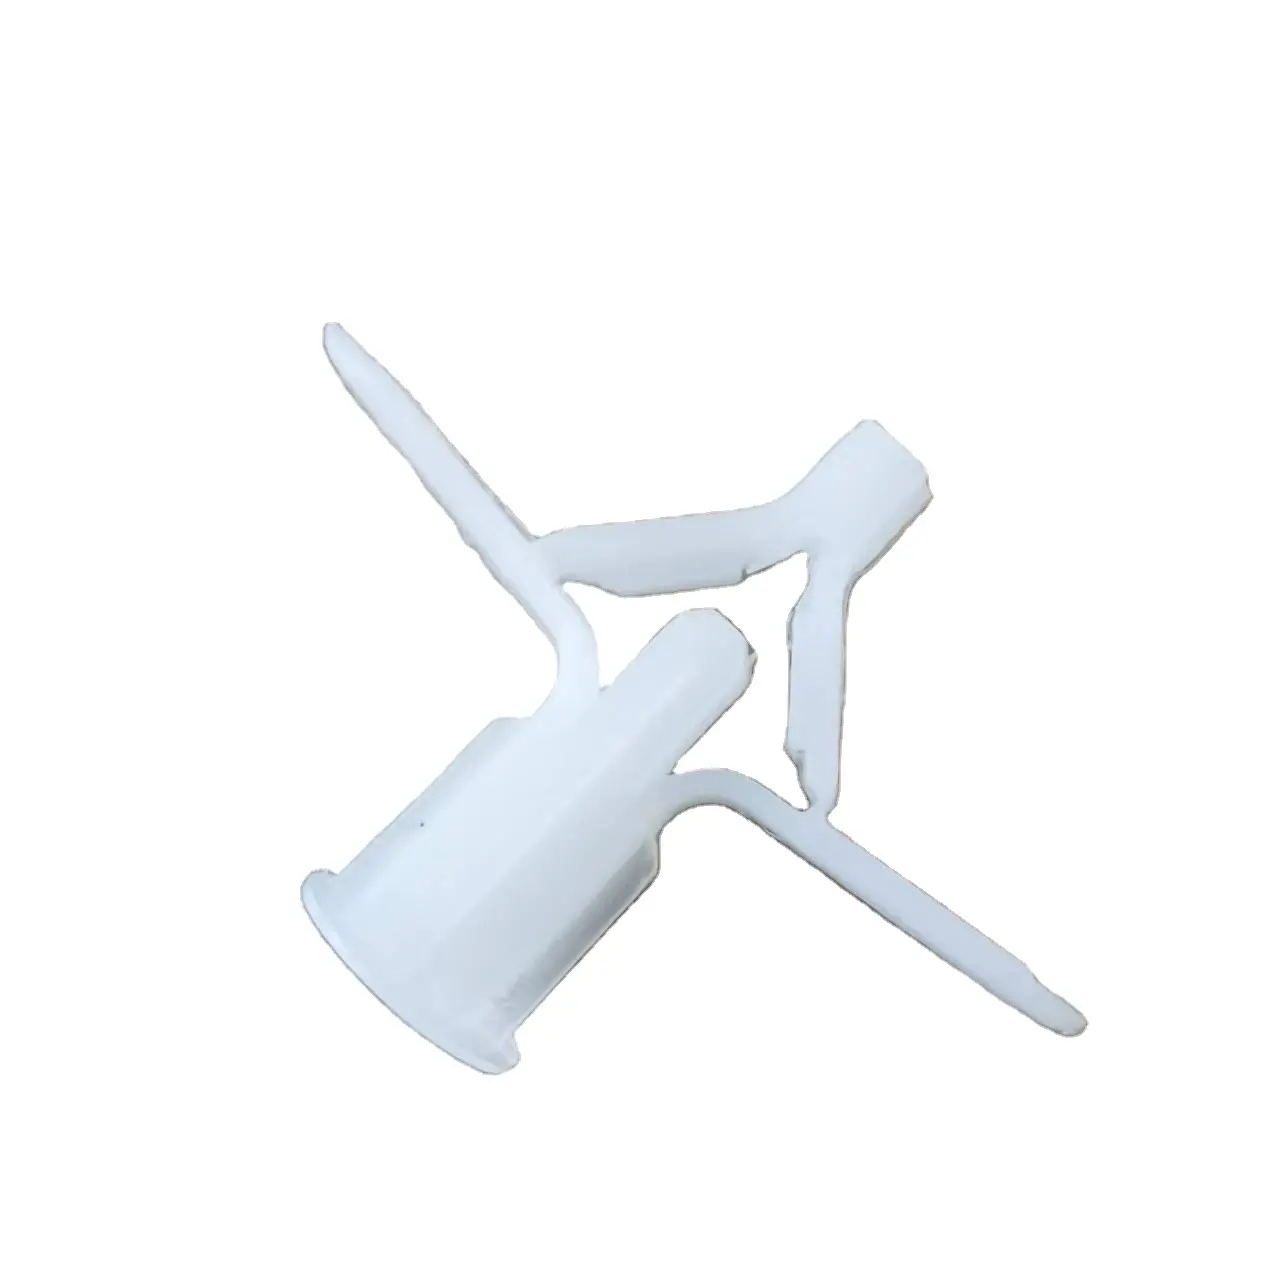 YZ-A005 Nylon Plastic Gypsum Board Wall Anchor Butterfly Toggle Anchor from China